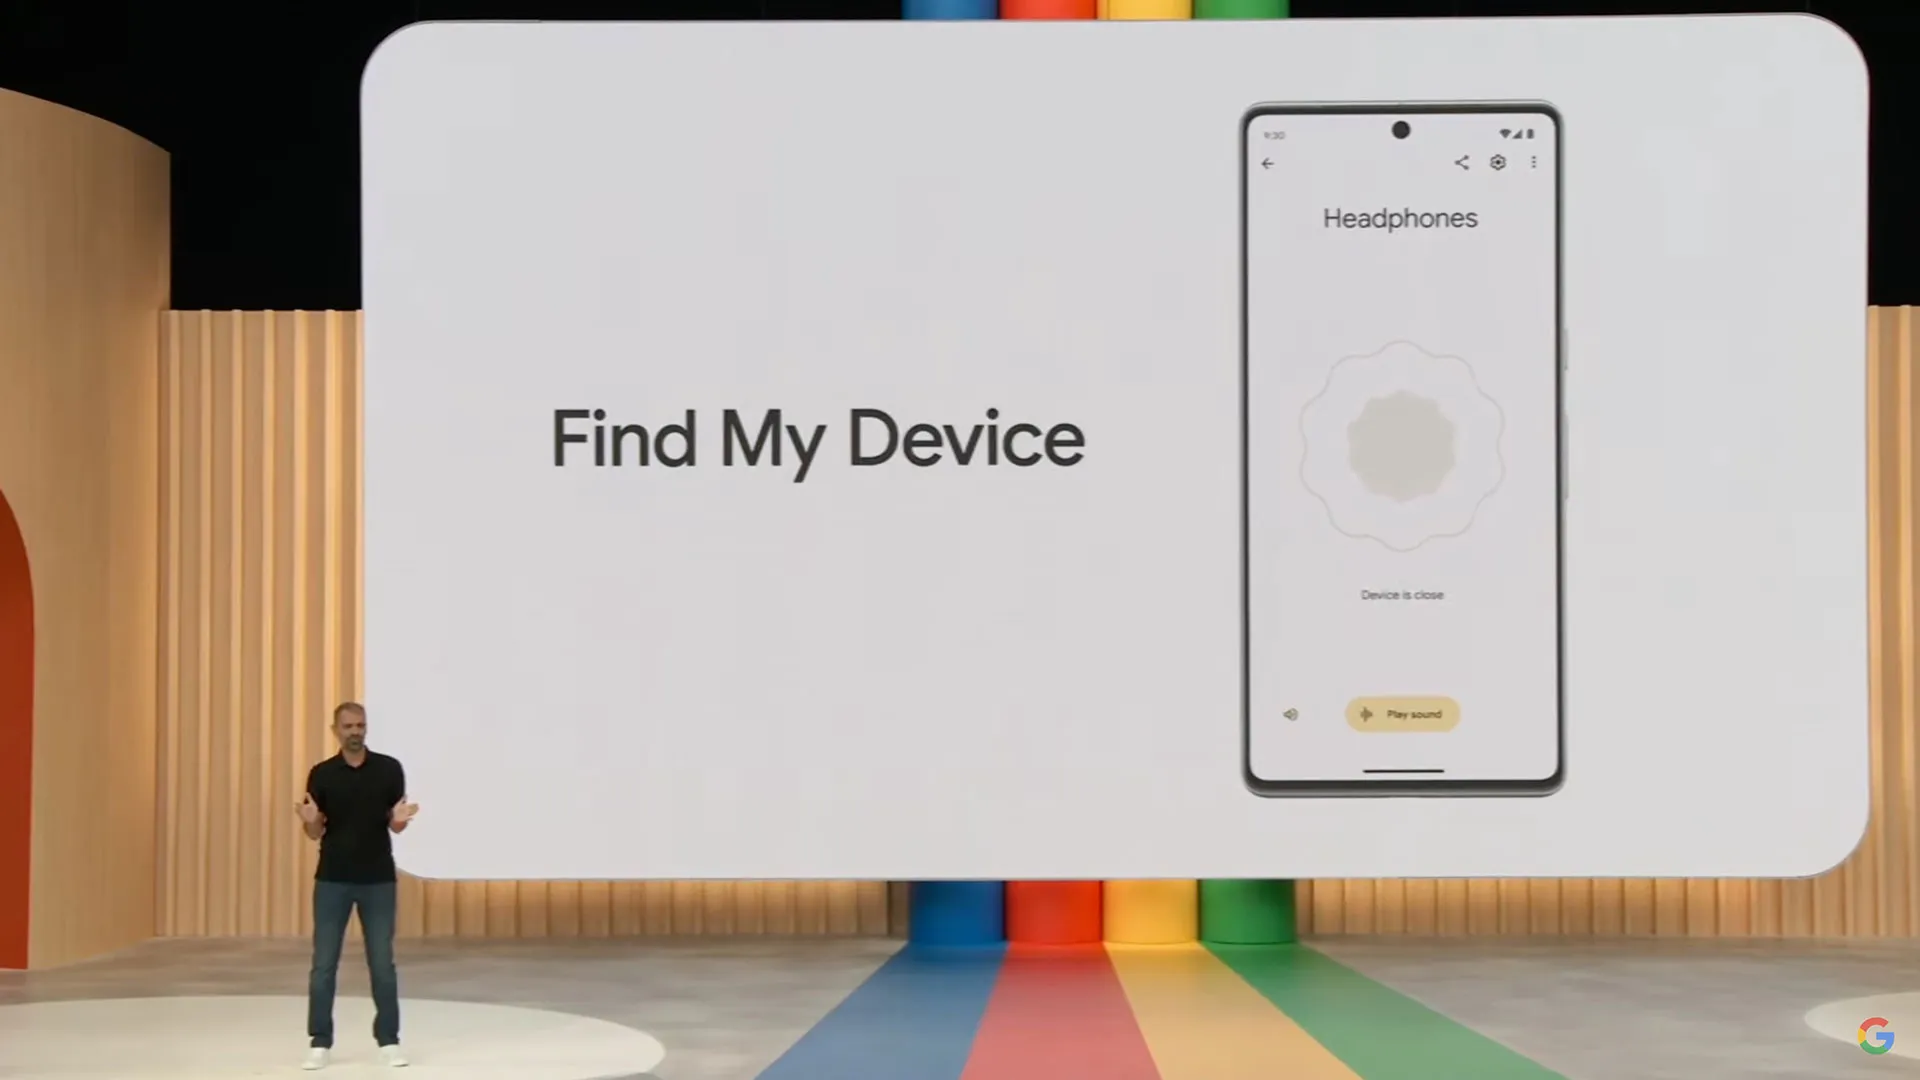 Google Find My Device may integrate ultra-wideband (UWB) and augmented reality (AR) features